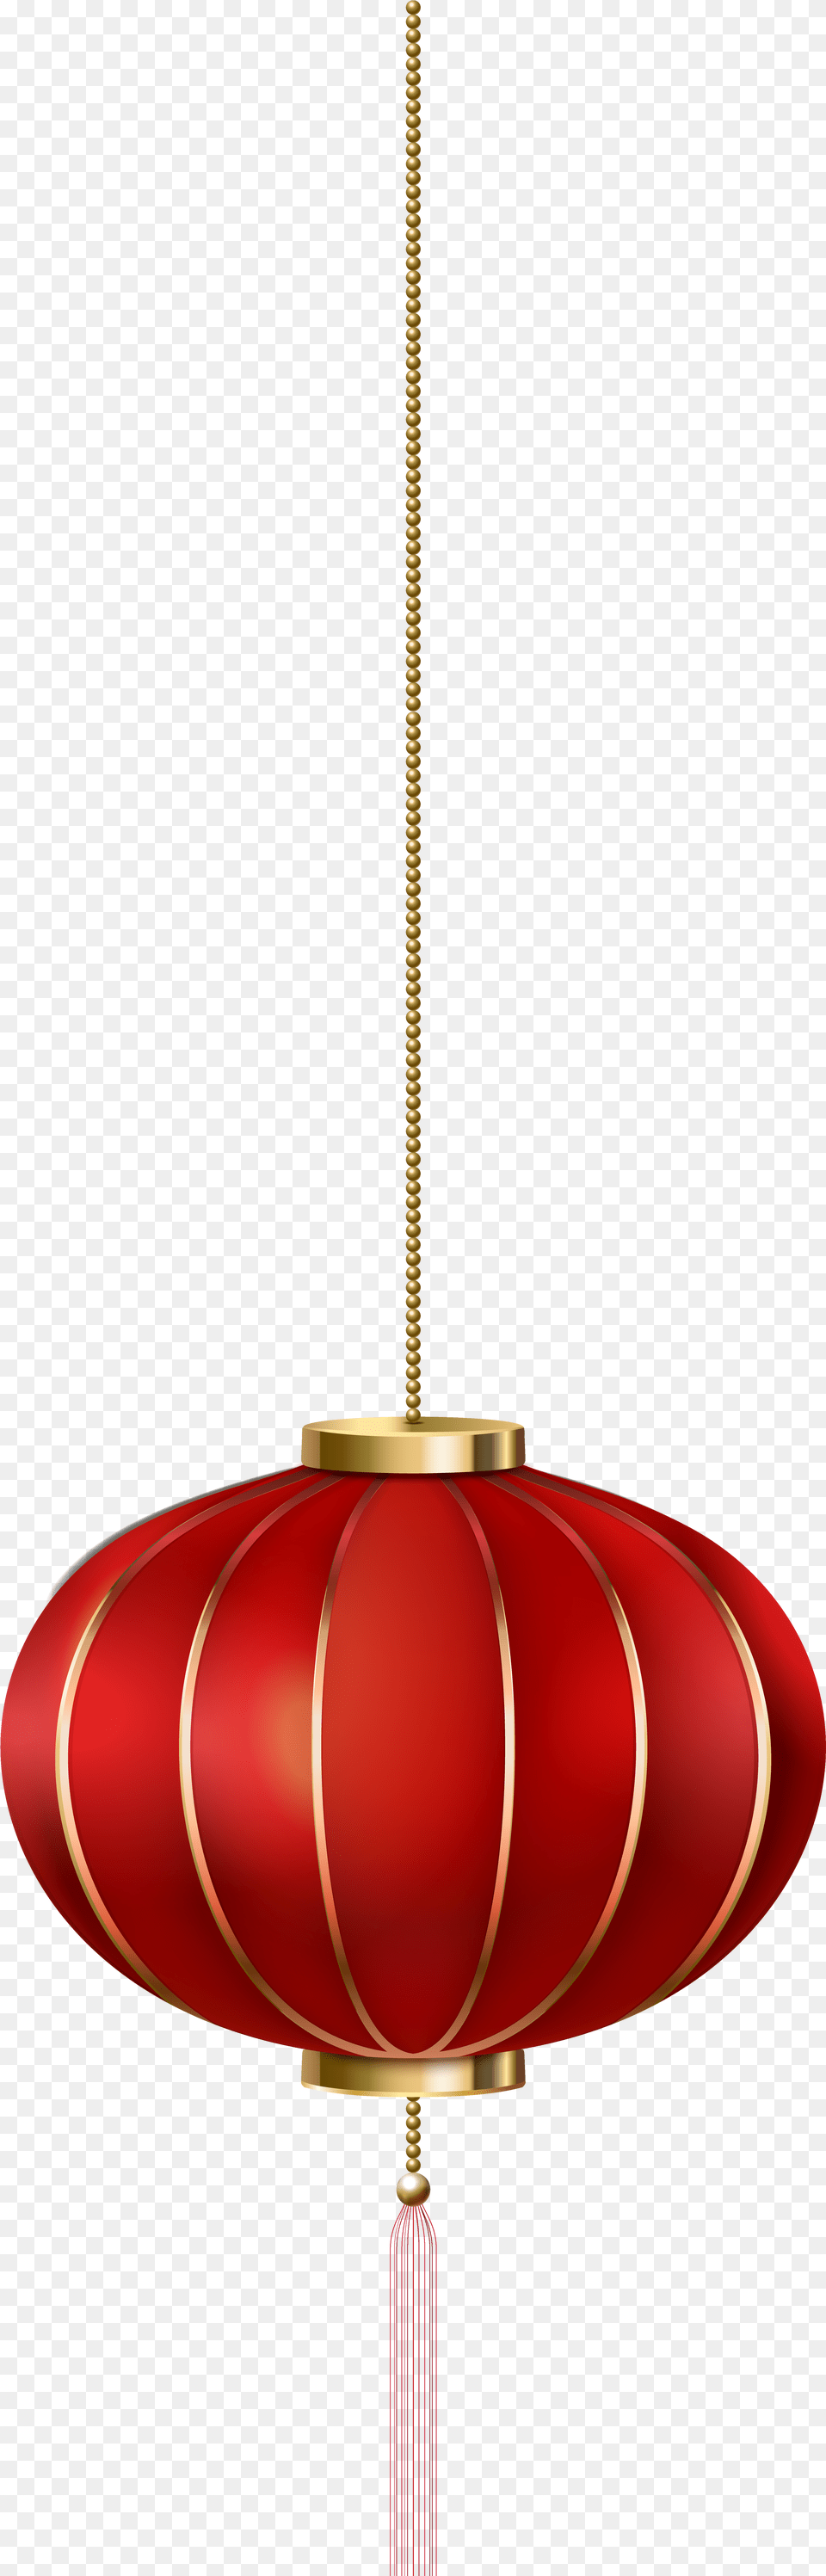 Red Chinese Lantern Clipart Lampshade, Lamp Free Transparent Png